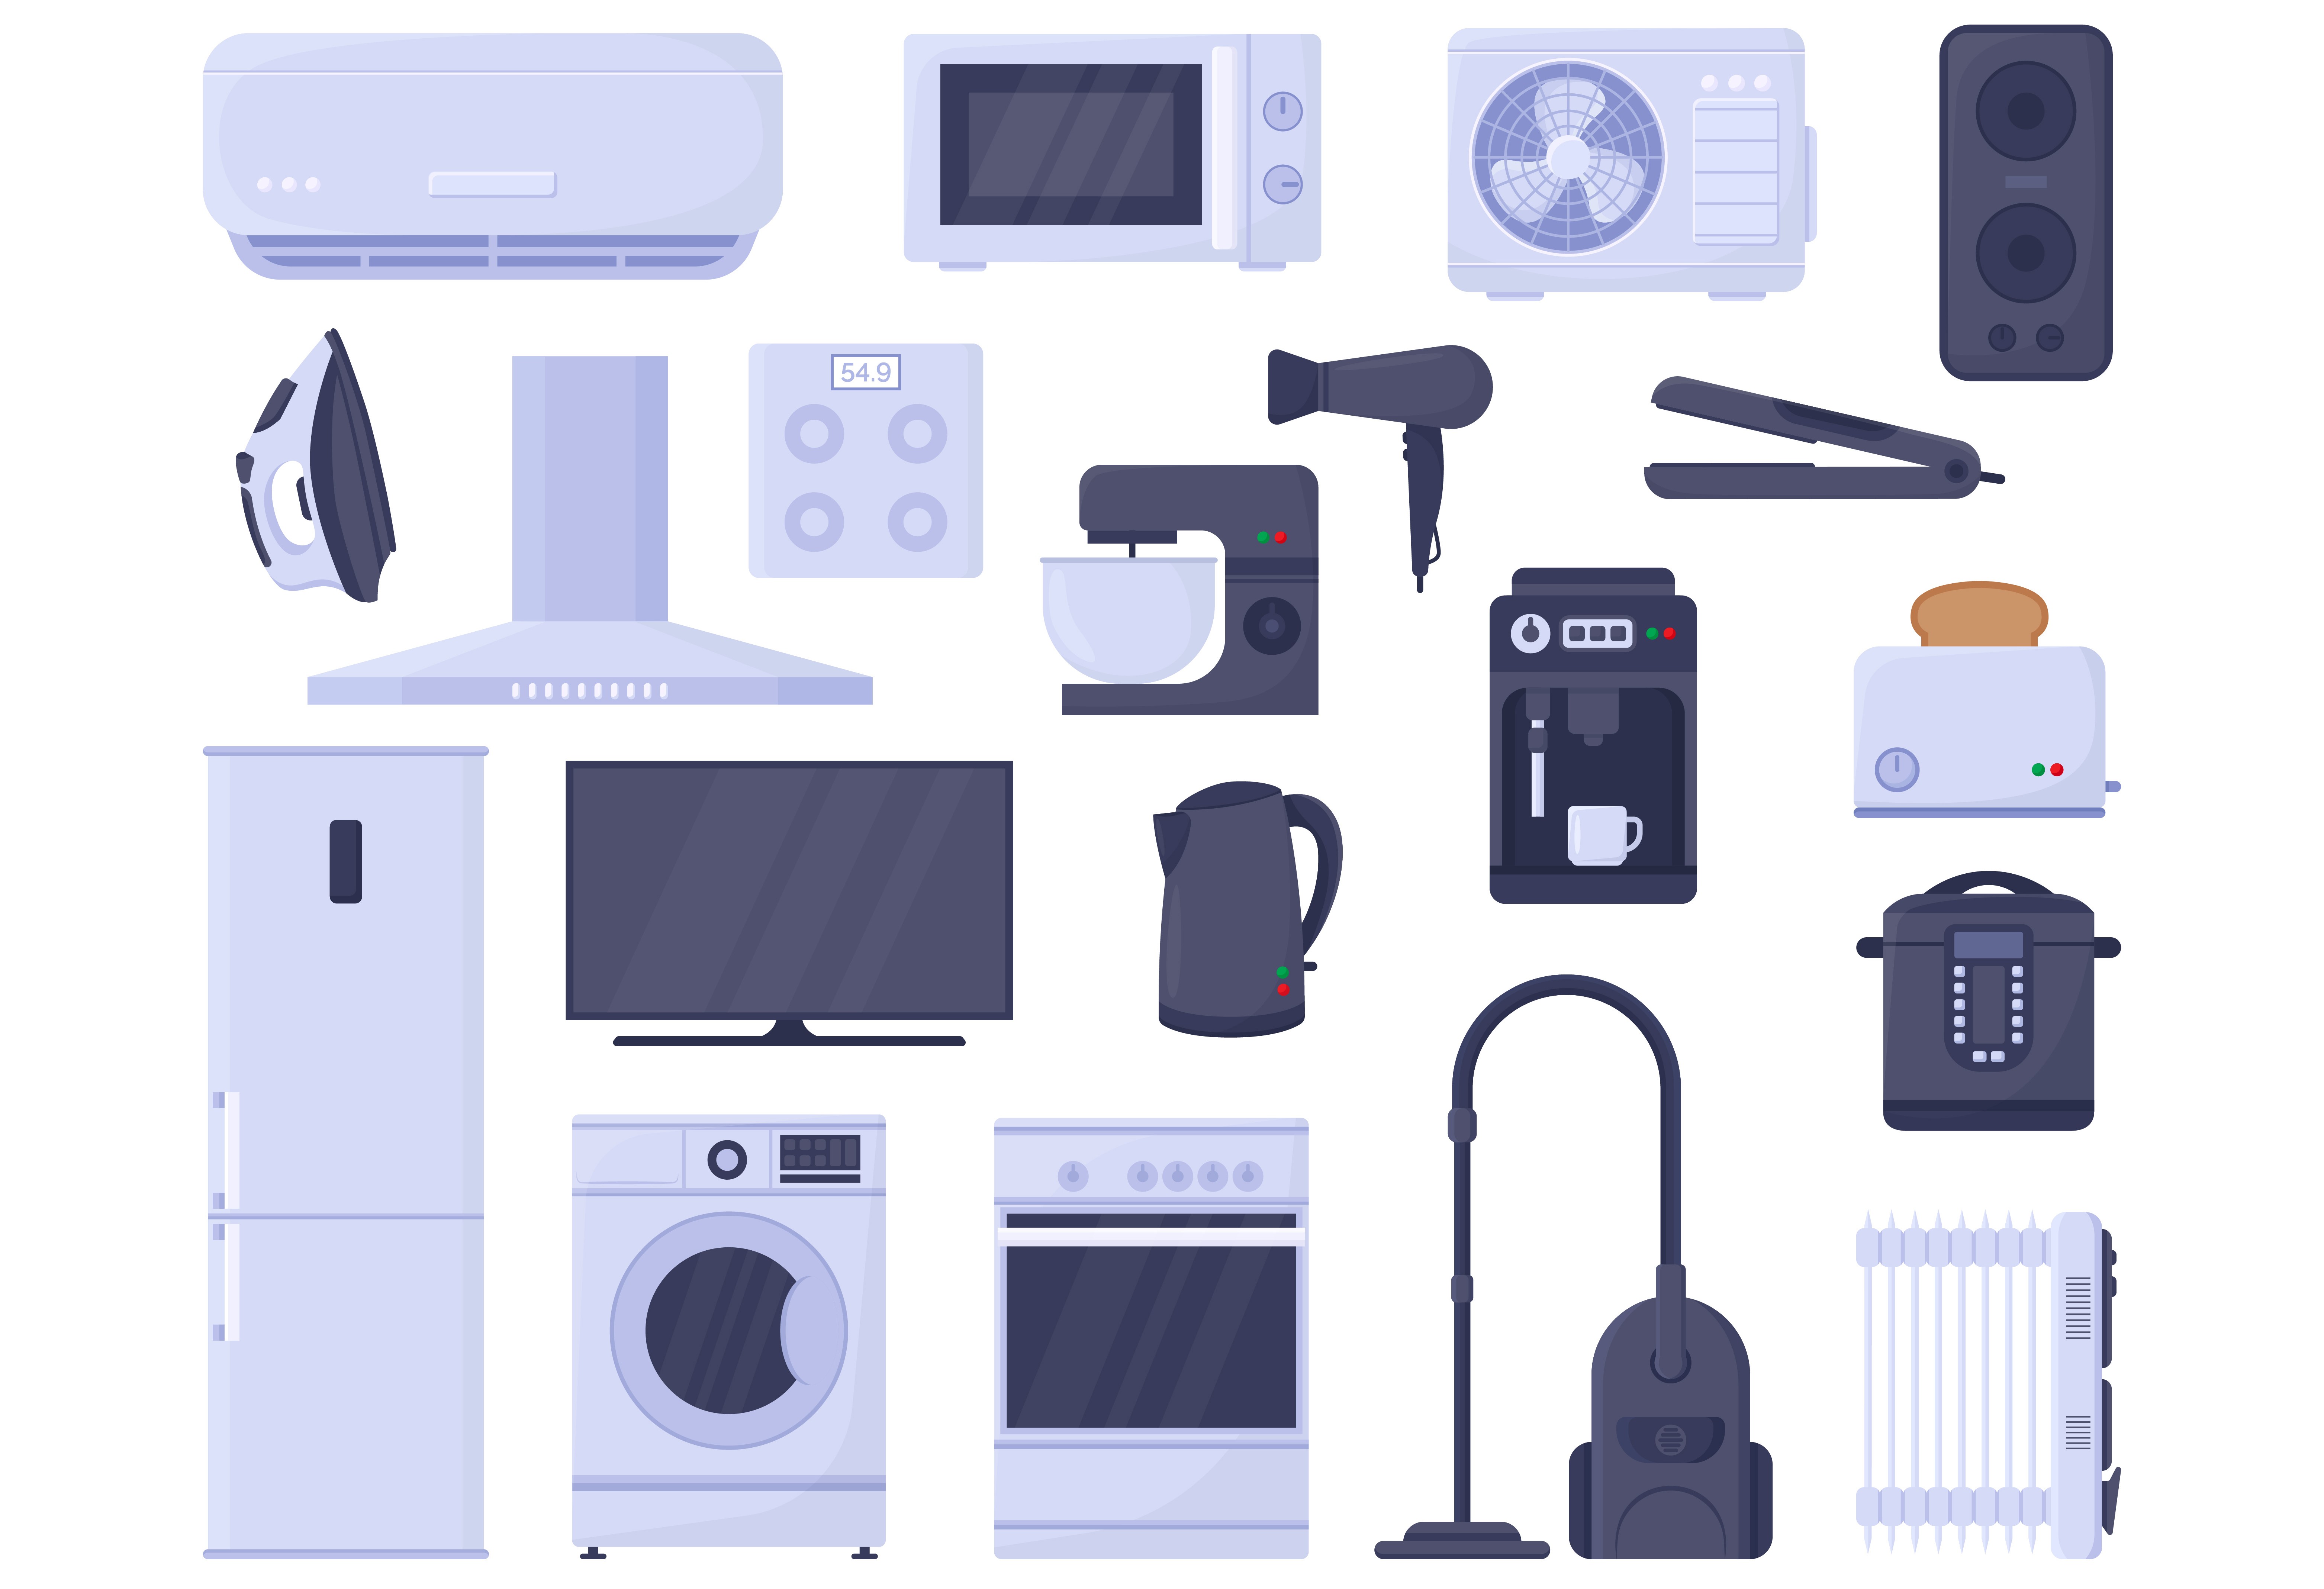 15 home appliances you can purchase this Tihar to elevate your living experience